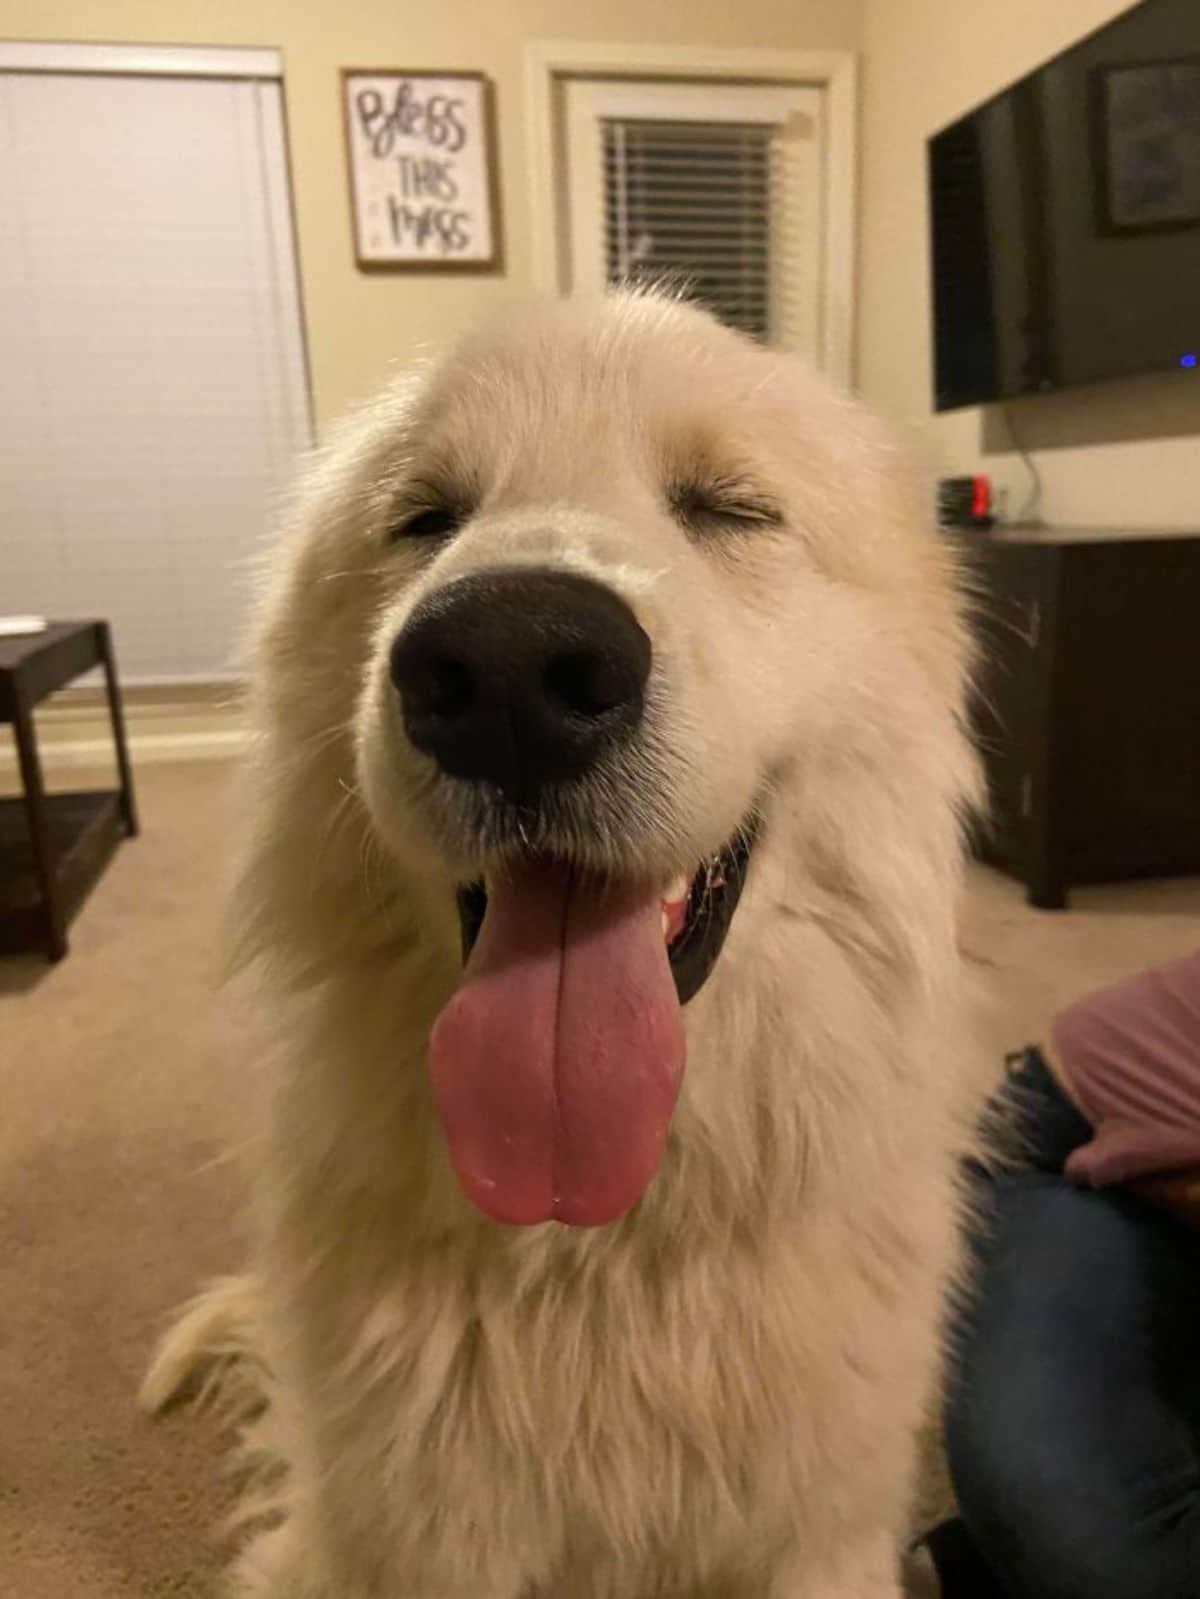 fluffy white dog sitting on the floor with eyes closed and tongue sticking out